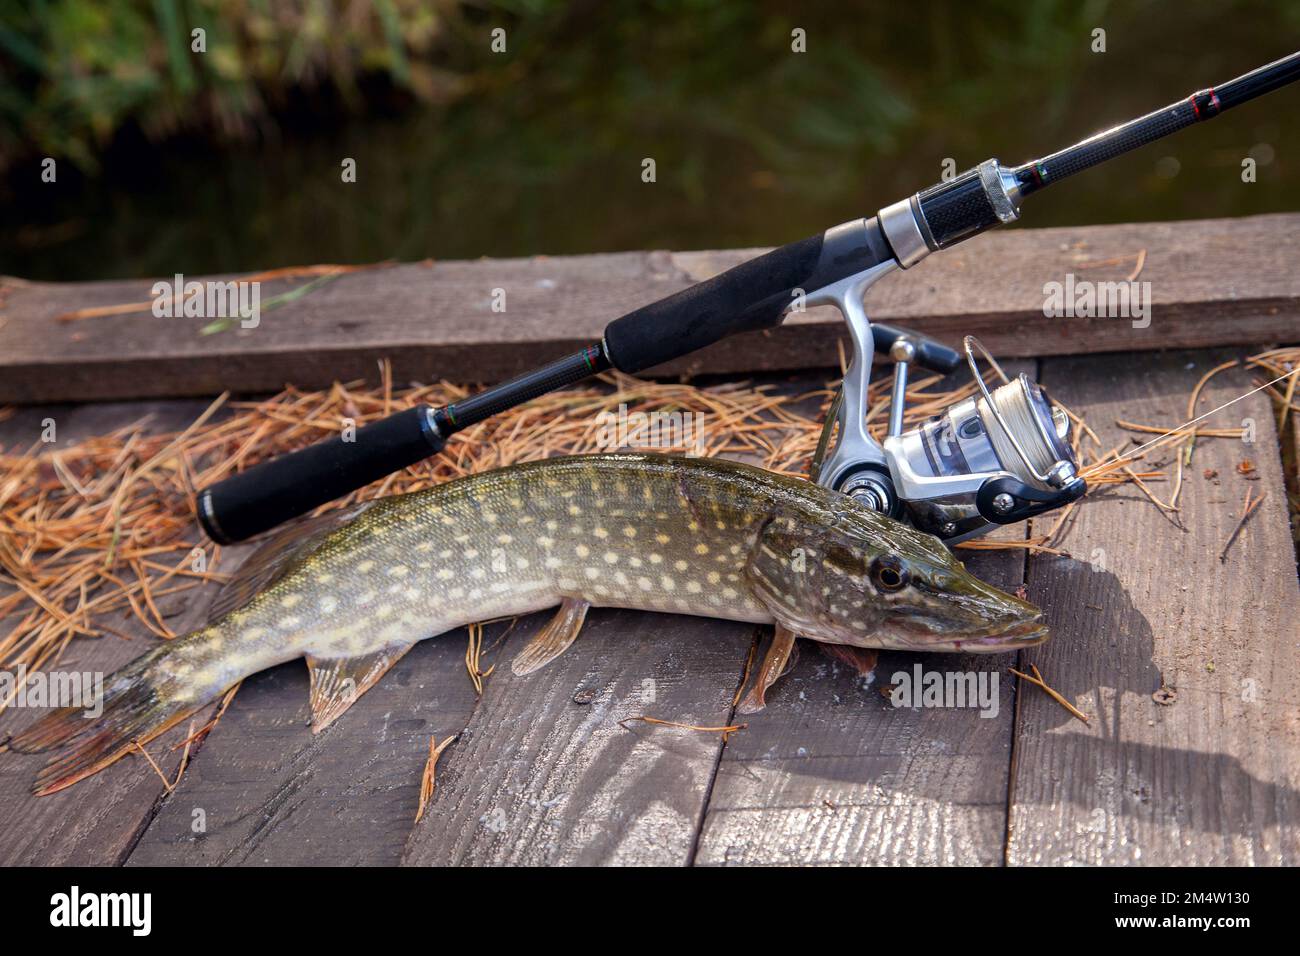 Freshwater Northern pike fish know as Esox Lucius and fishing rod with reel lying on vintage wooden background with yellow leaves at autumn time. Fish Stock Photo